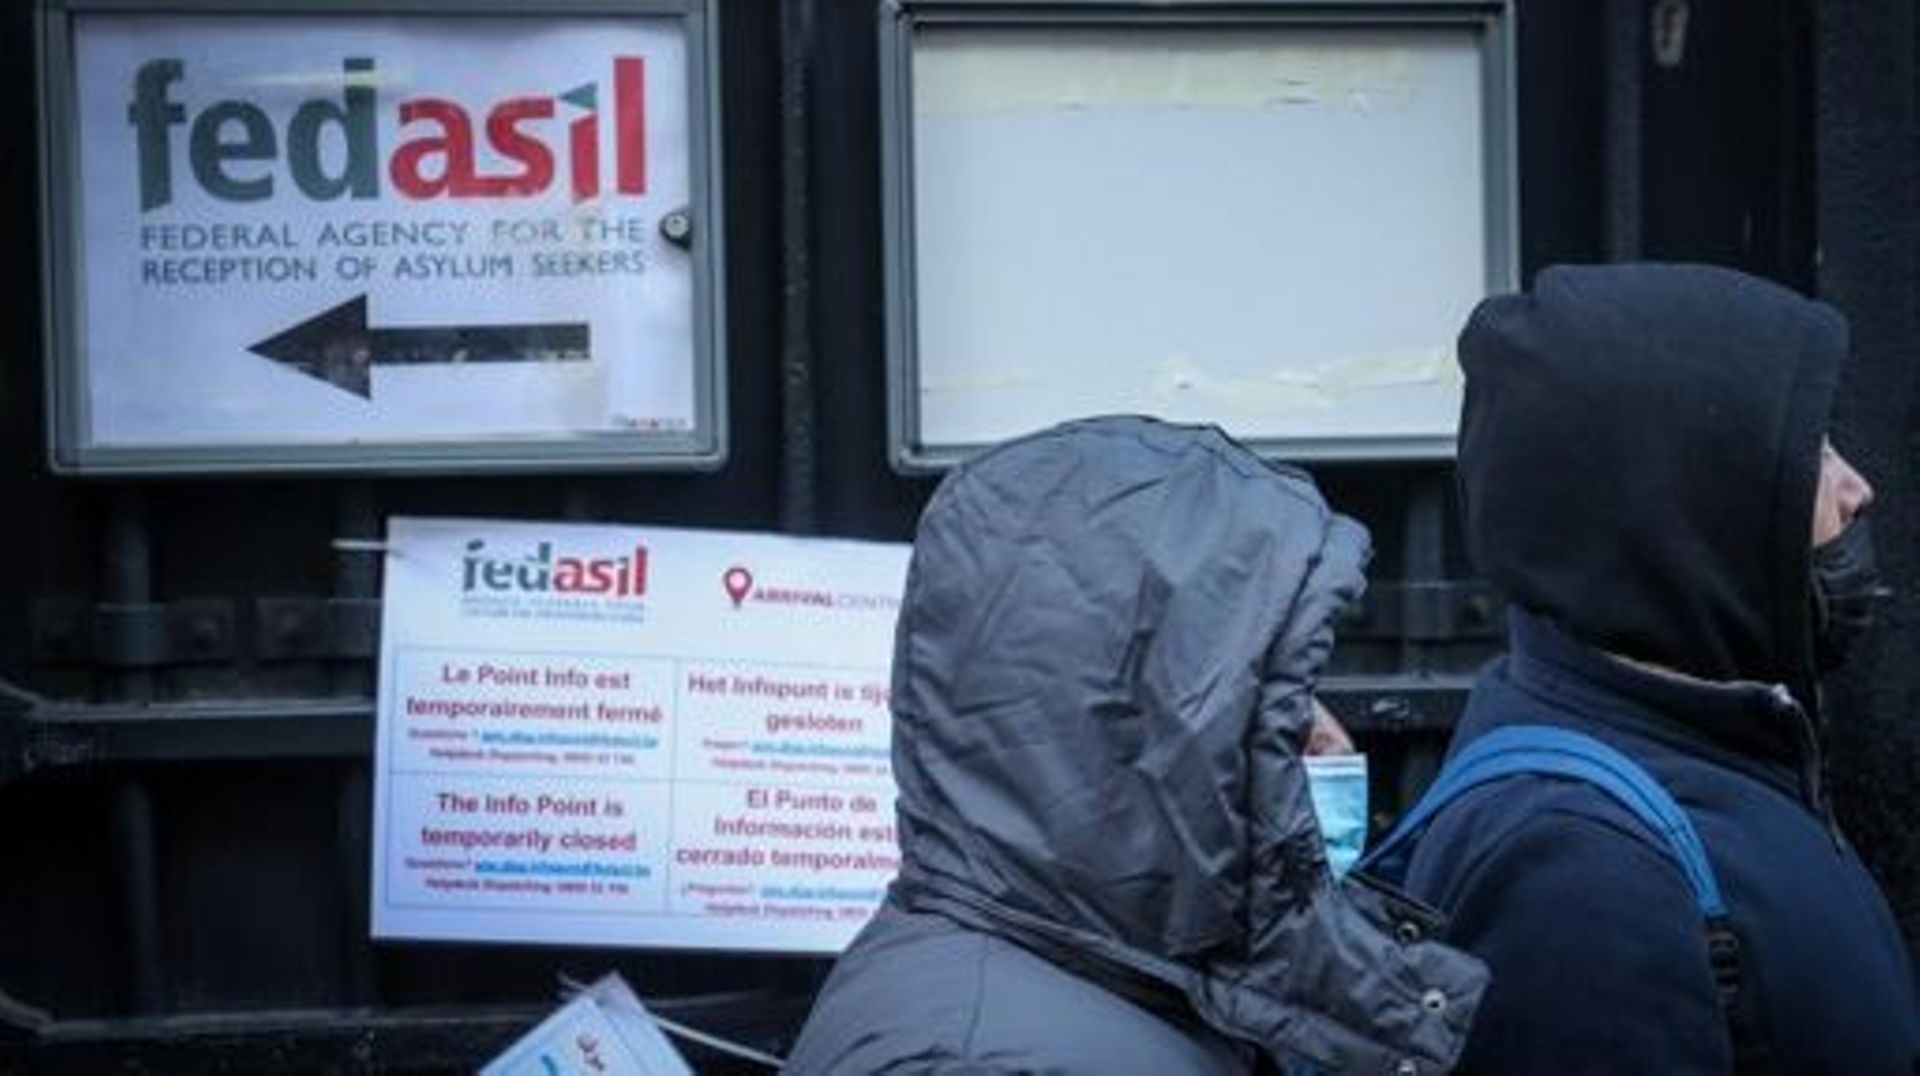 Illustration shows refugees waiting outside, in the cold, at the entry to the 'Klein Kasteeltje – Petit Chateau' (Little Castle) Fedasil registration center for asylum seekers in Brussels, Tuesday 07 December 2021. Various humanitarian organizations deno